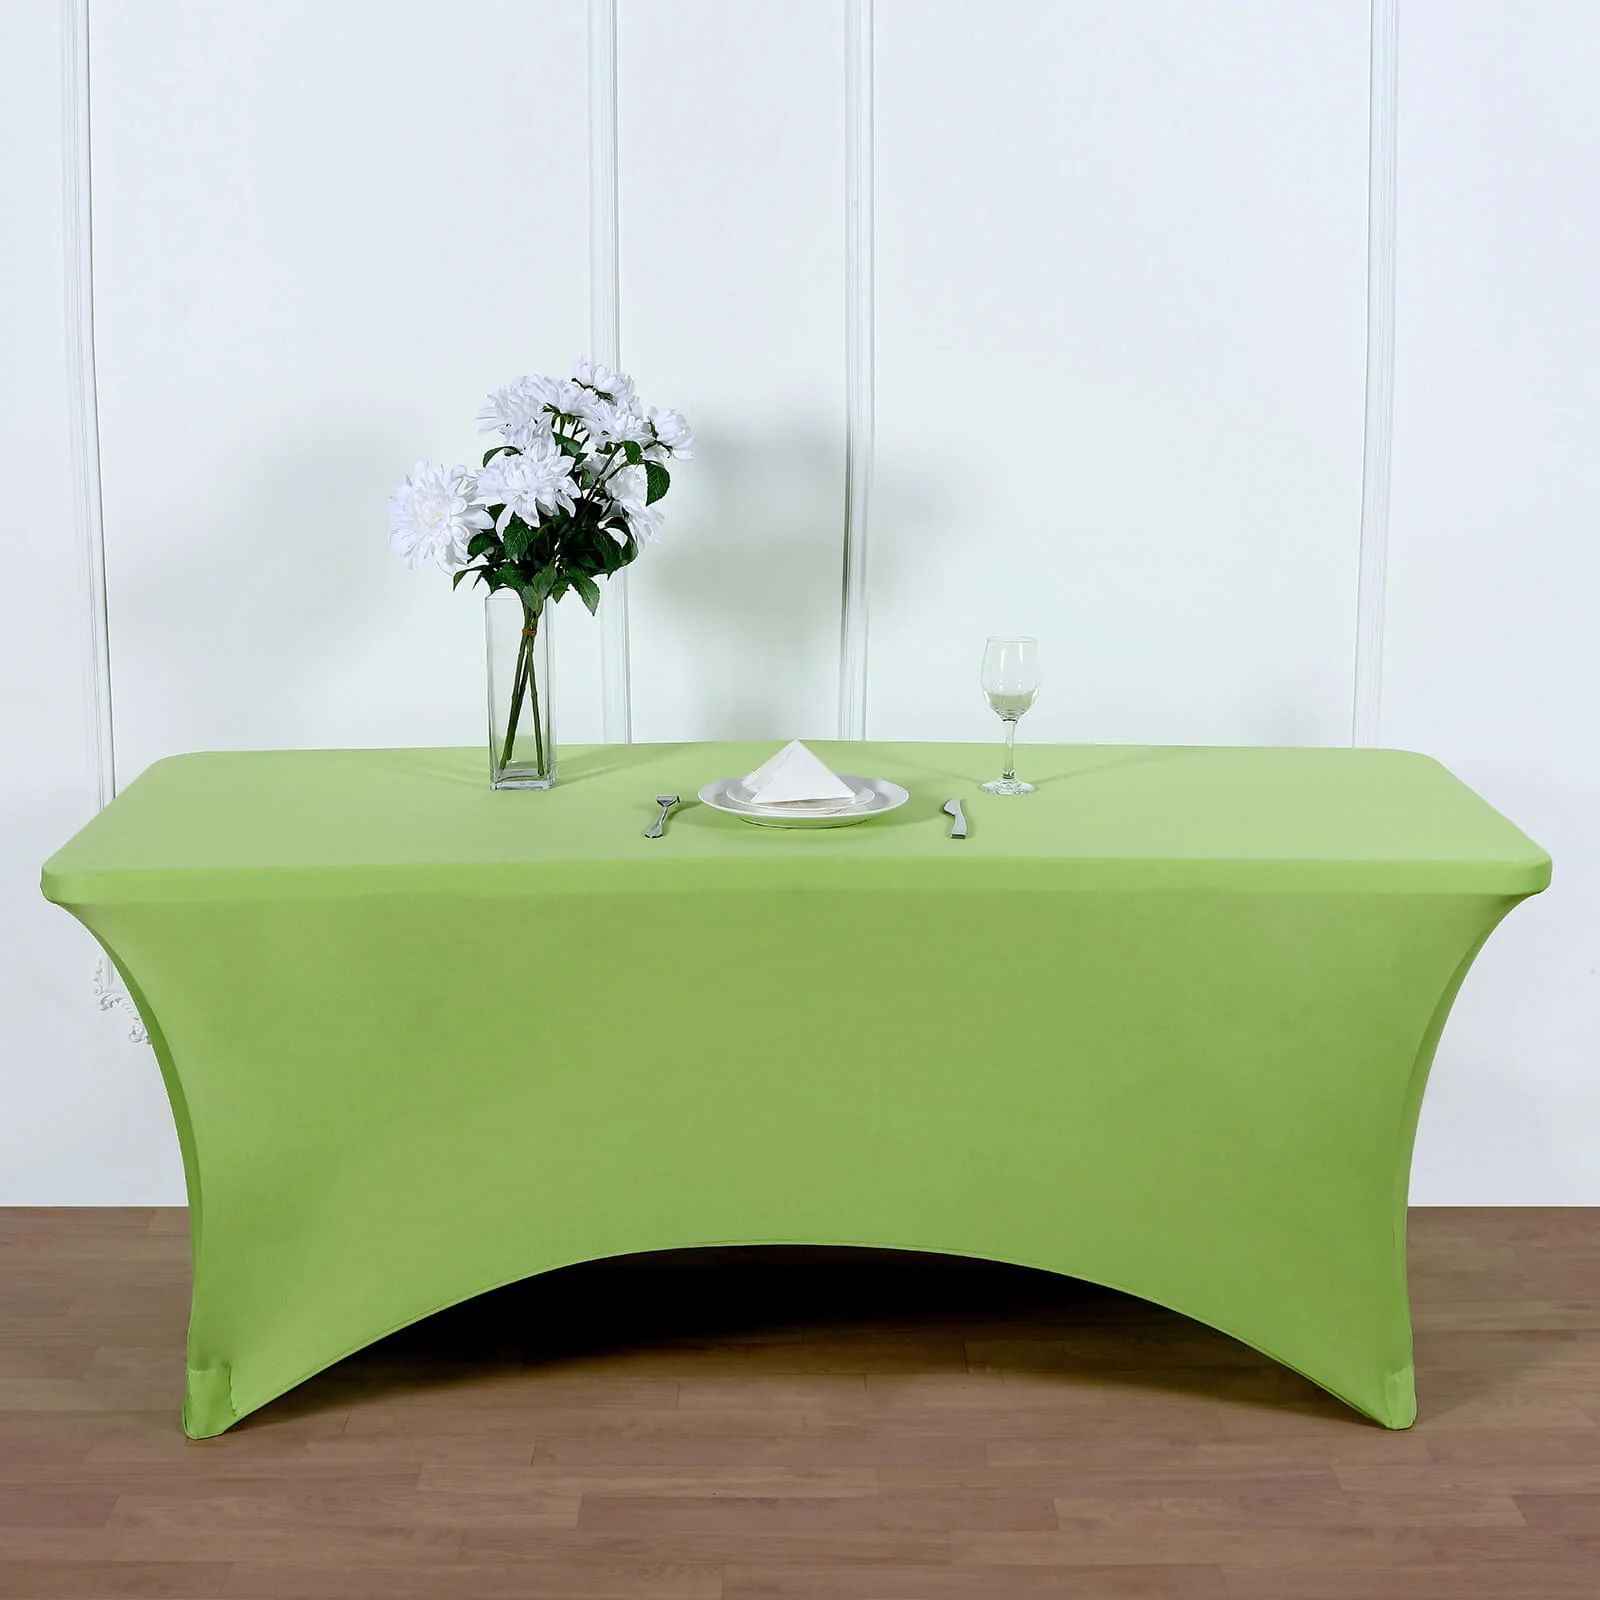 Apple Green - 6 Ft Rectangular Spandex Table Cover Wedding Party - £26.66 GBP